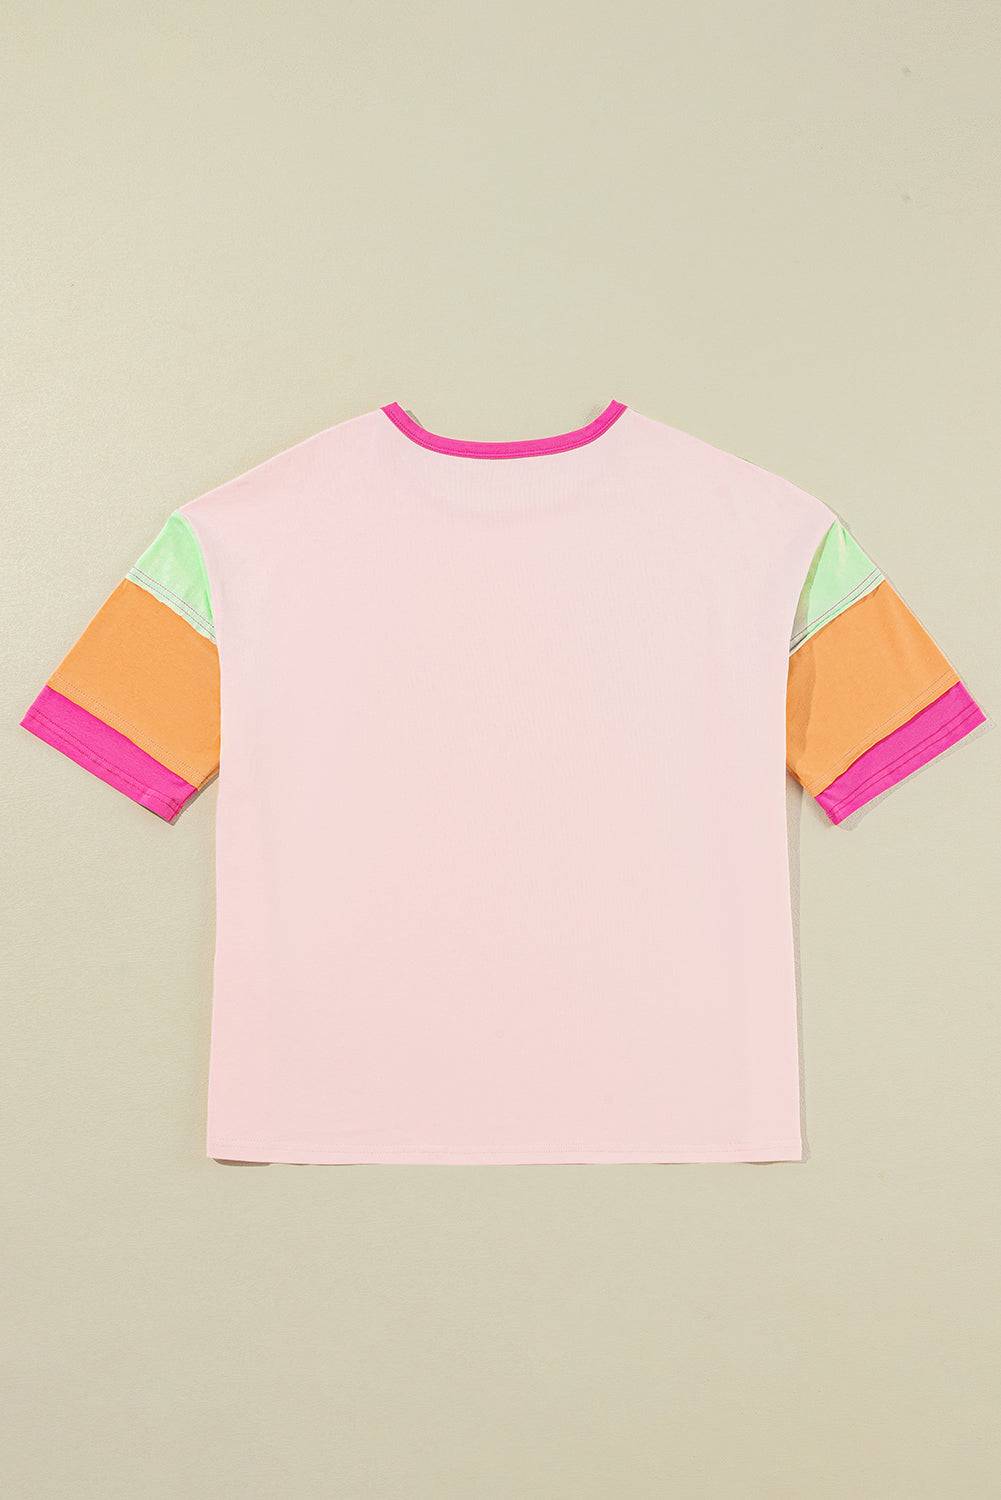 a pink t - shirt with multi - colored sleeves